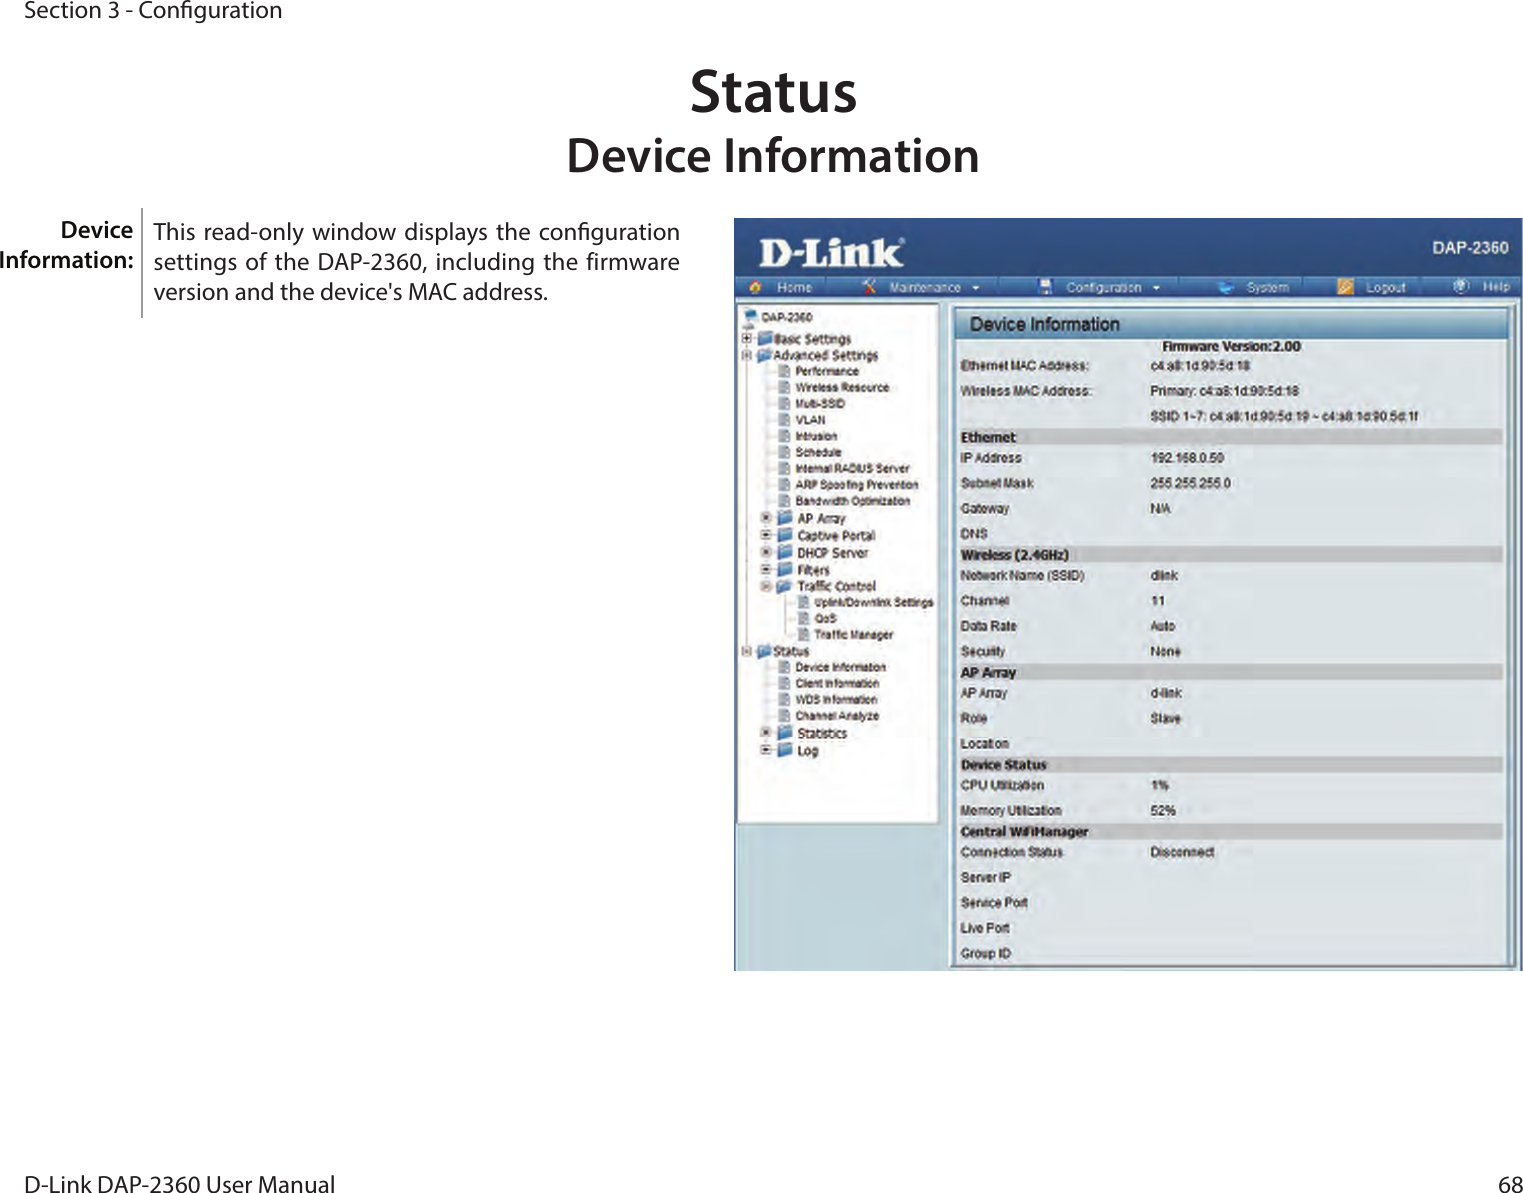 68D-Link DAP-2360 User ManualSection 3 - CongurationStatus Device InformationThis read-only window displays the conguration settings of the DAP-2360, including the firmware version and the device&apos;s MAC address.Device Information: